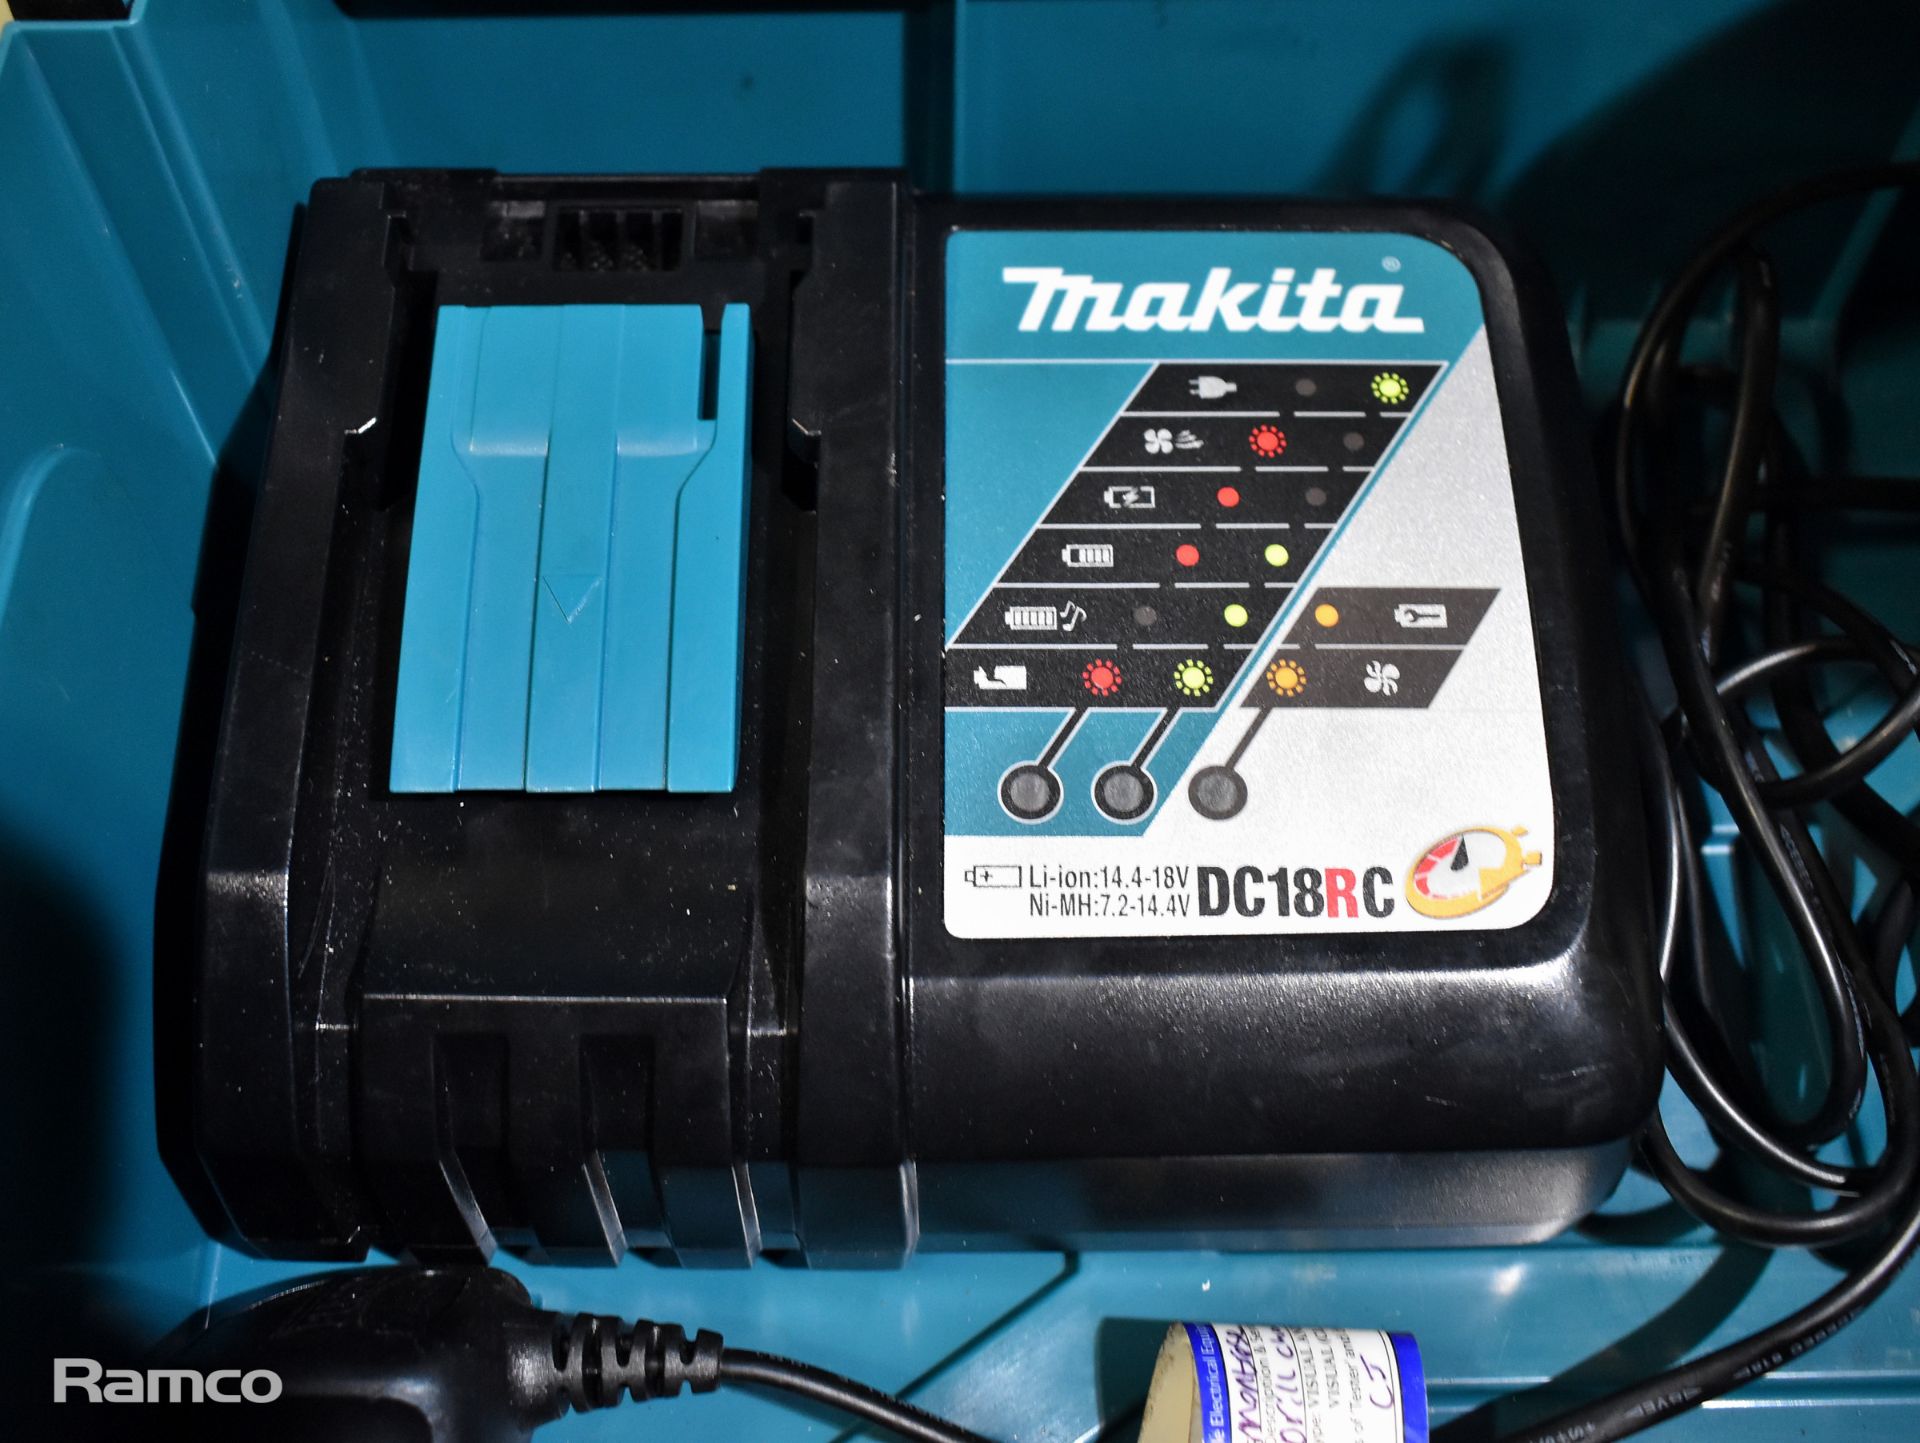 Makita DHP458 cordless drill with DC18RC battery charger, drill handle and storage case - Image 5 of 6